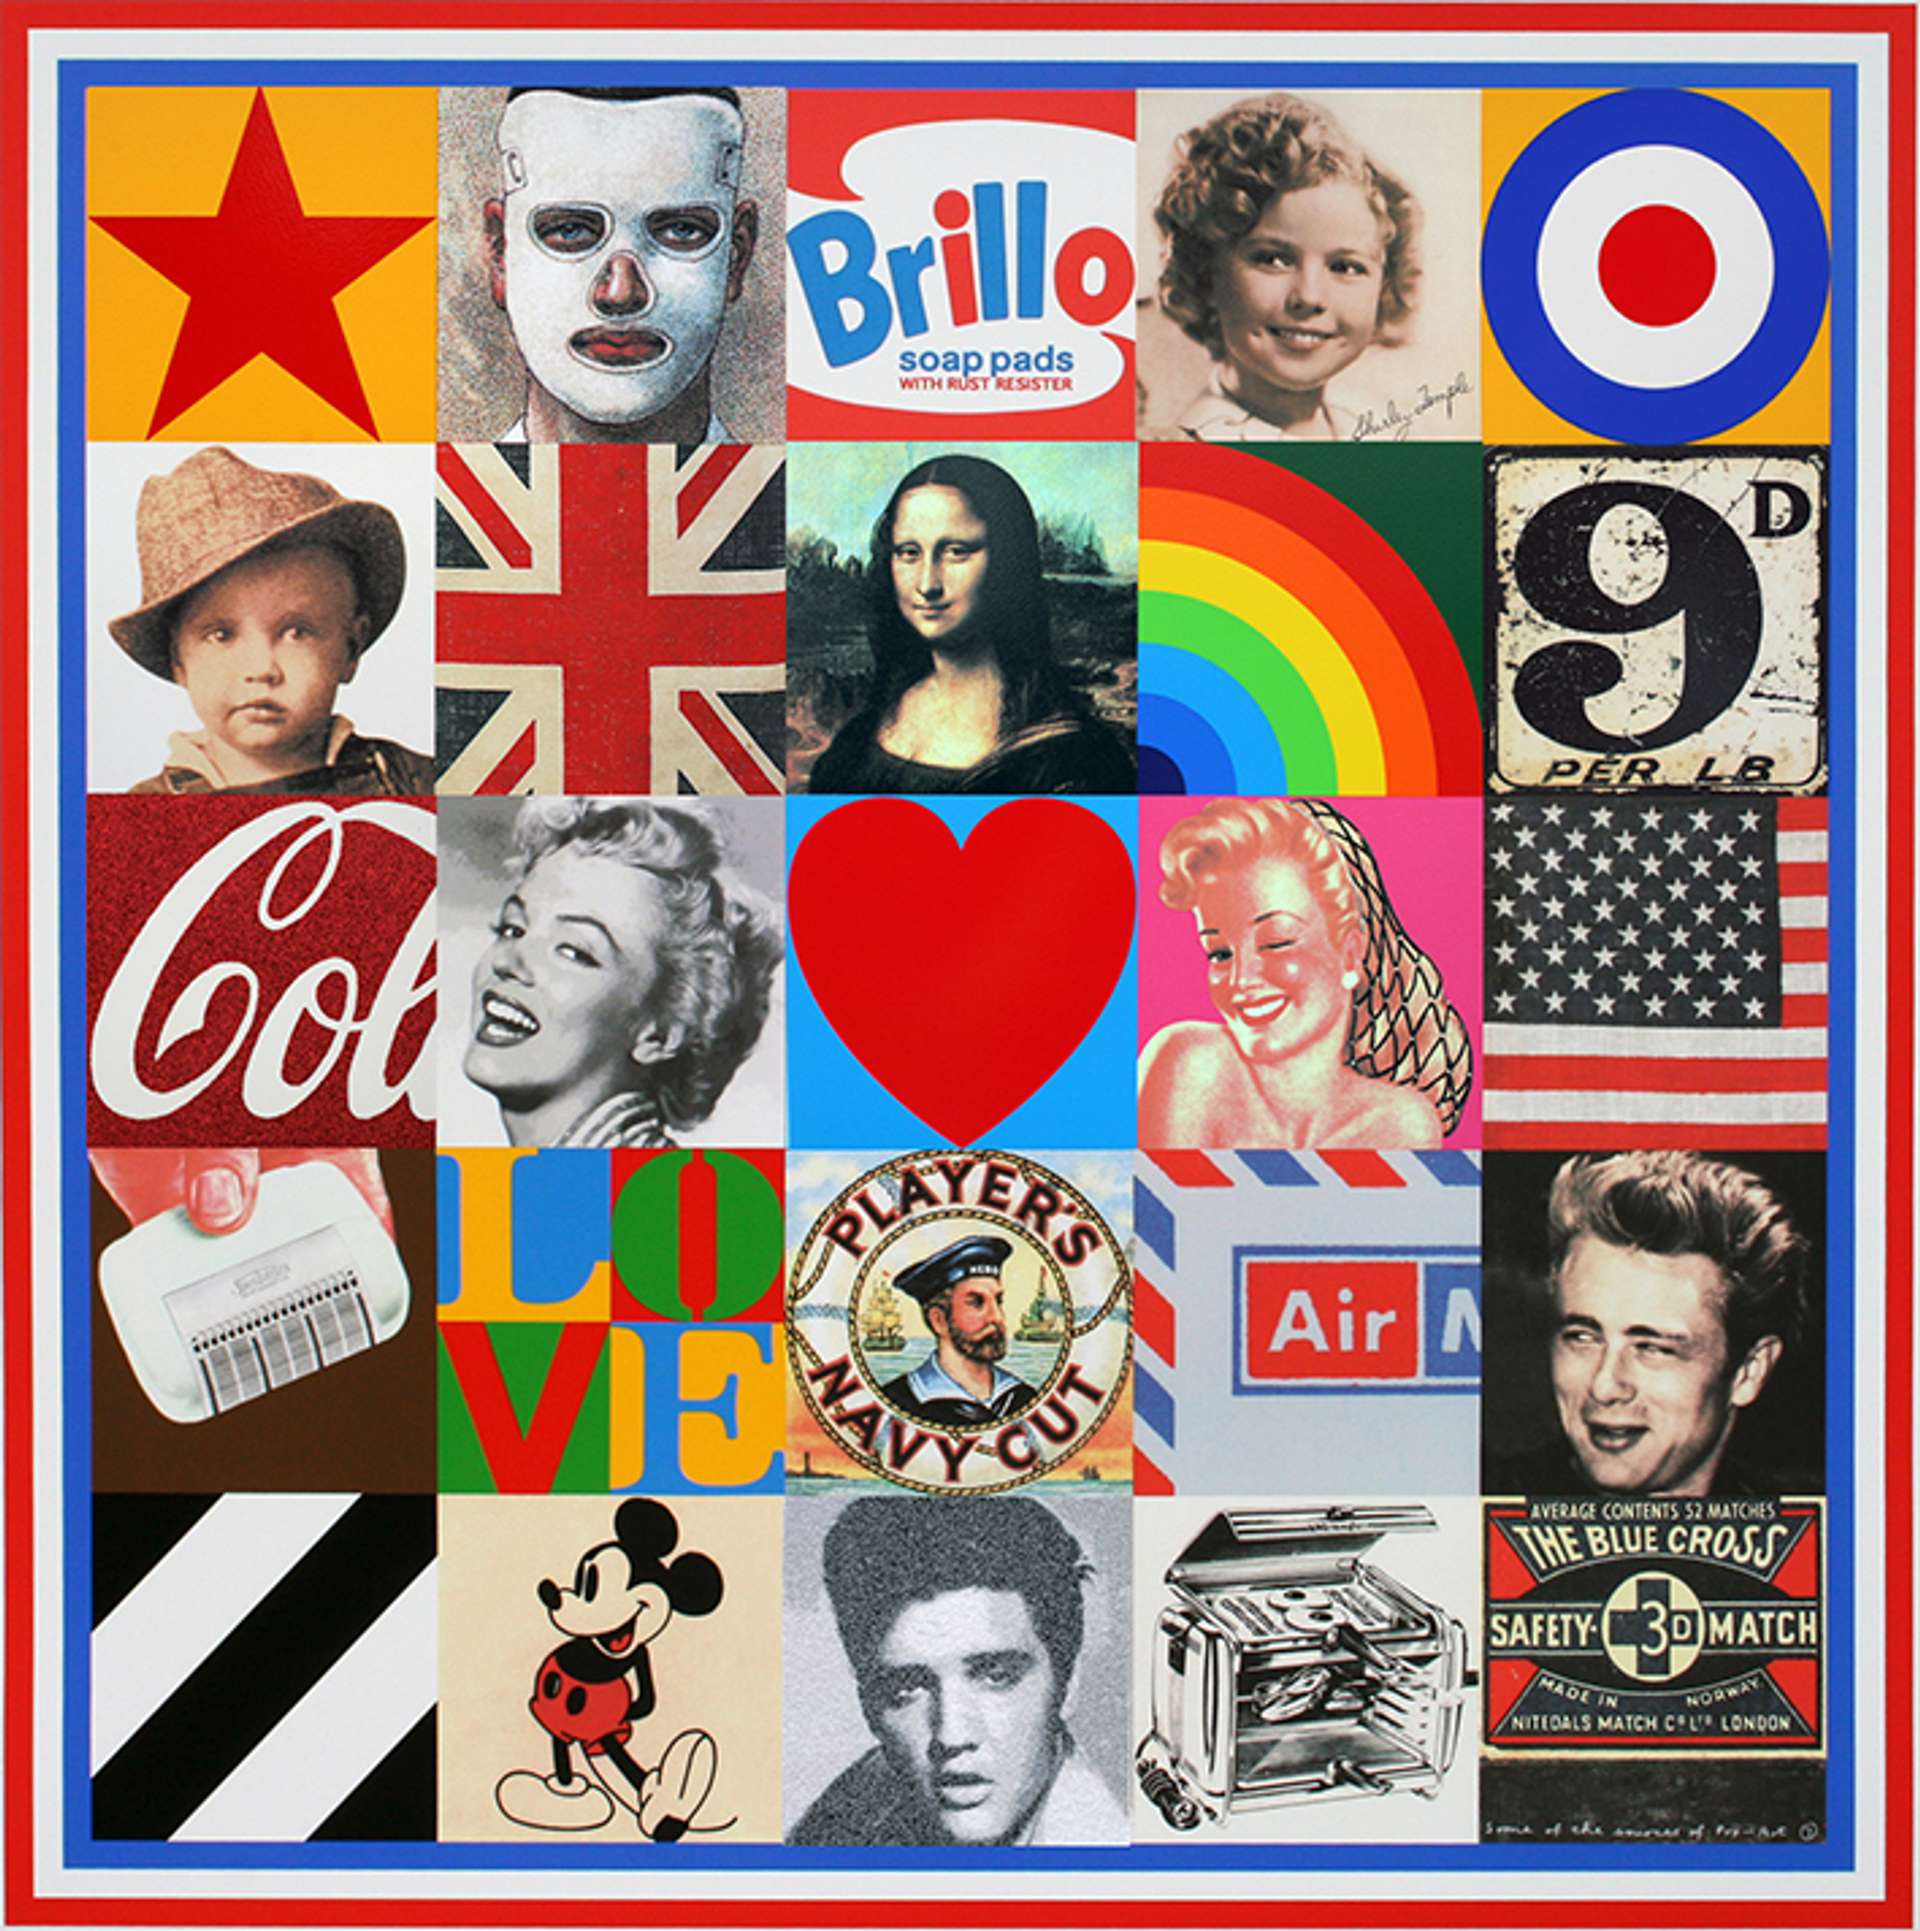 100 Sources Of Pop Art by Peter Blake